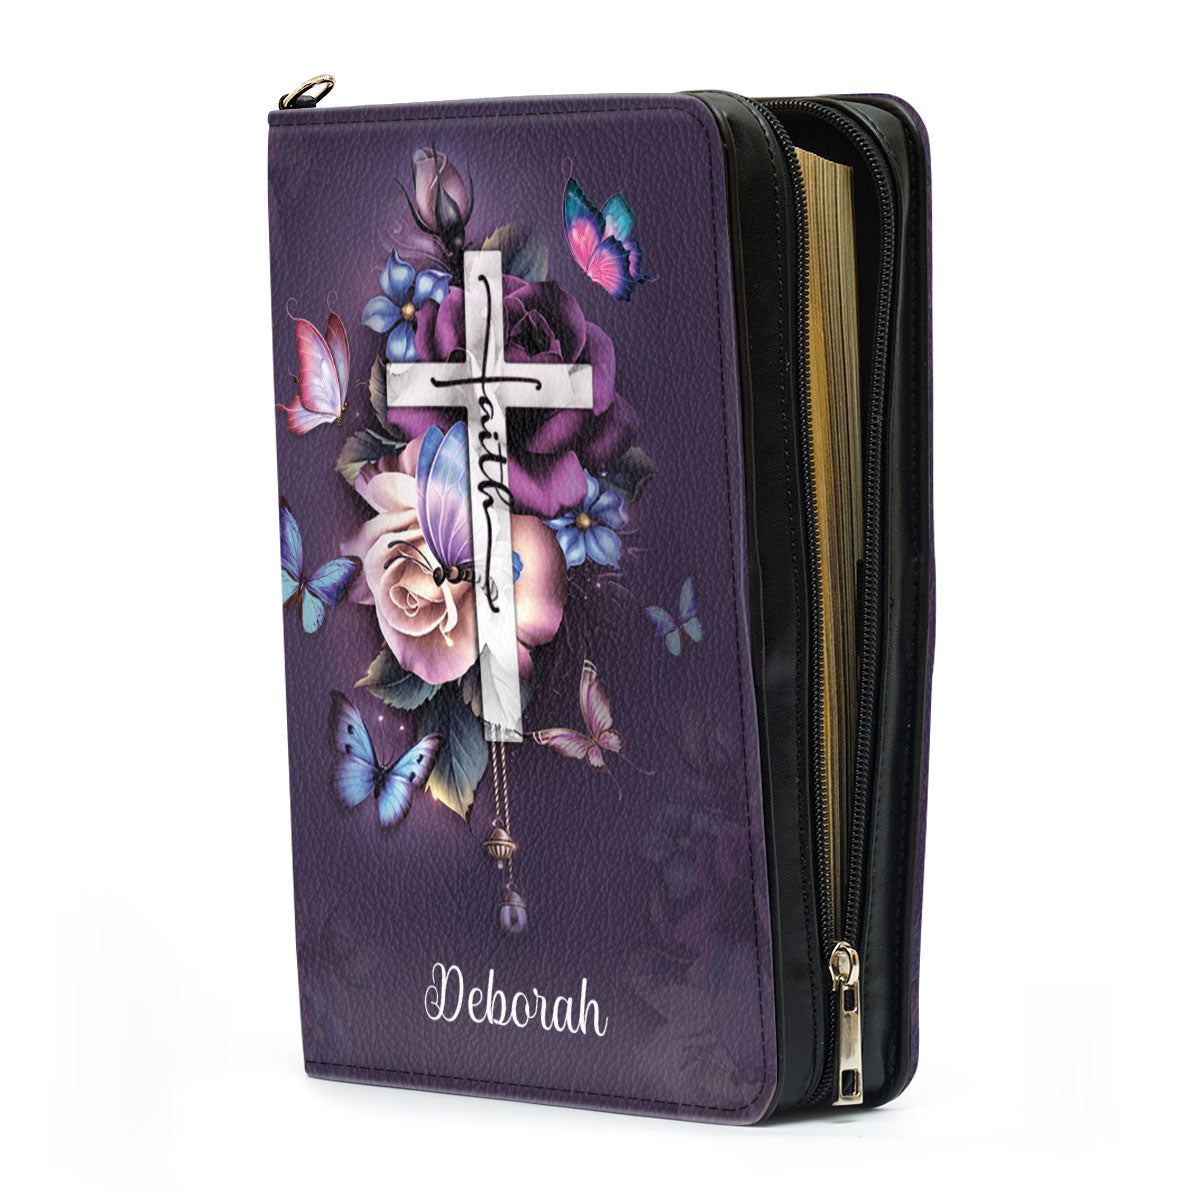 Pretty Personalized Bible Cover - I Can Only Imagine HH175B